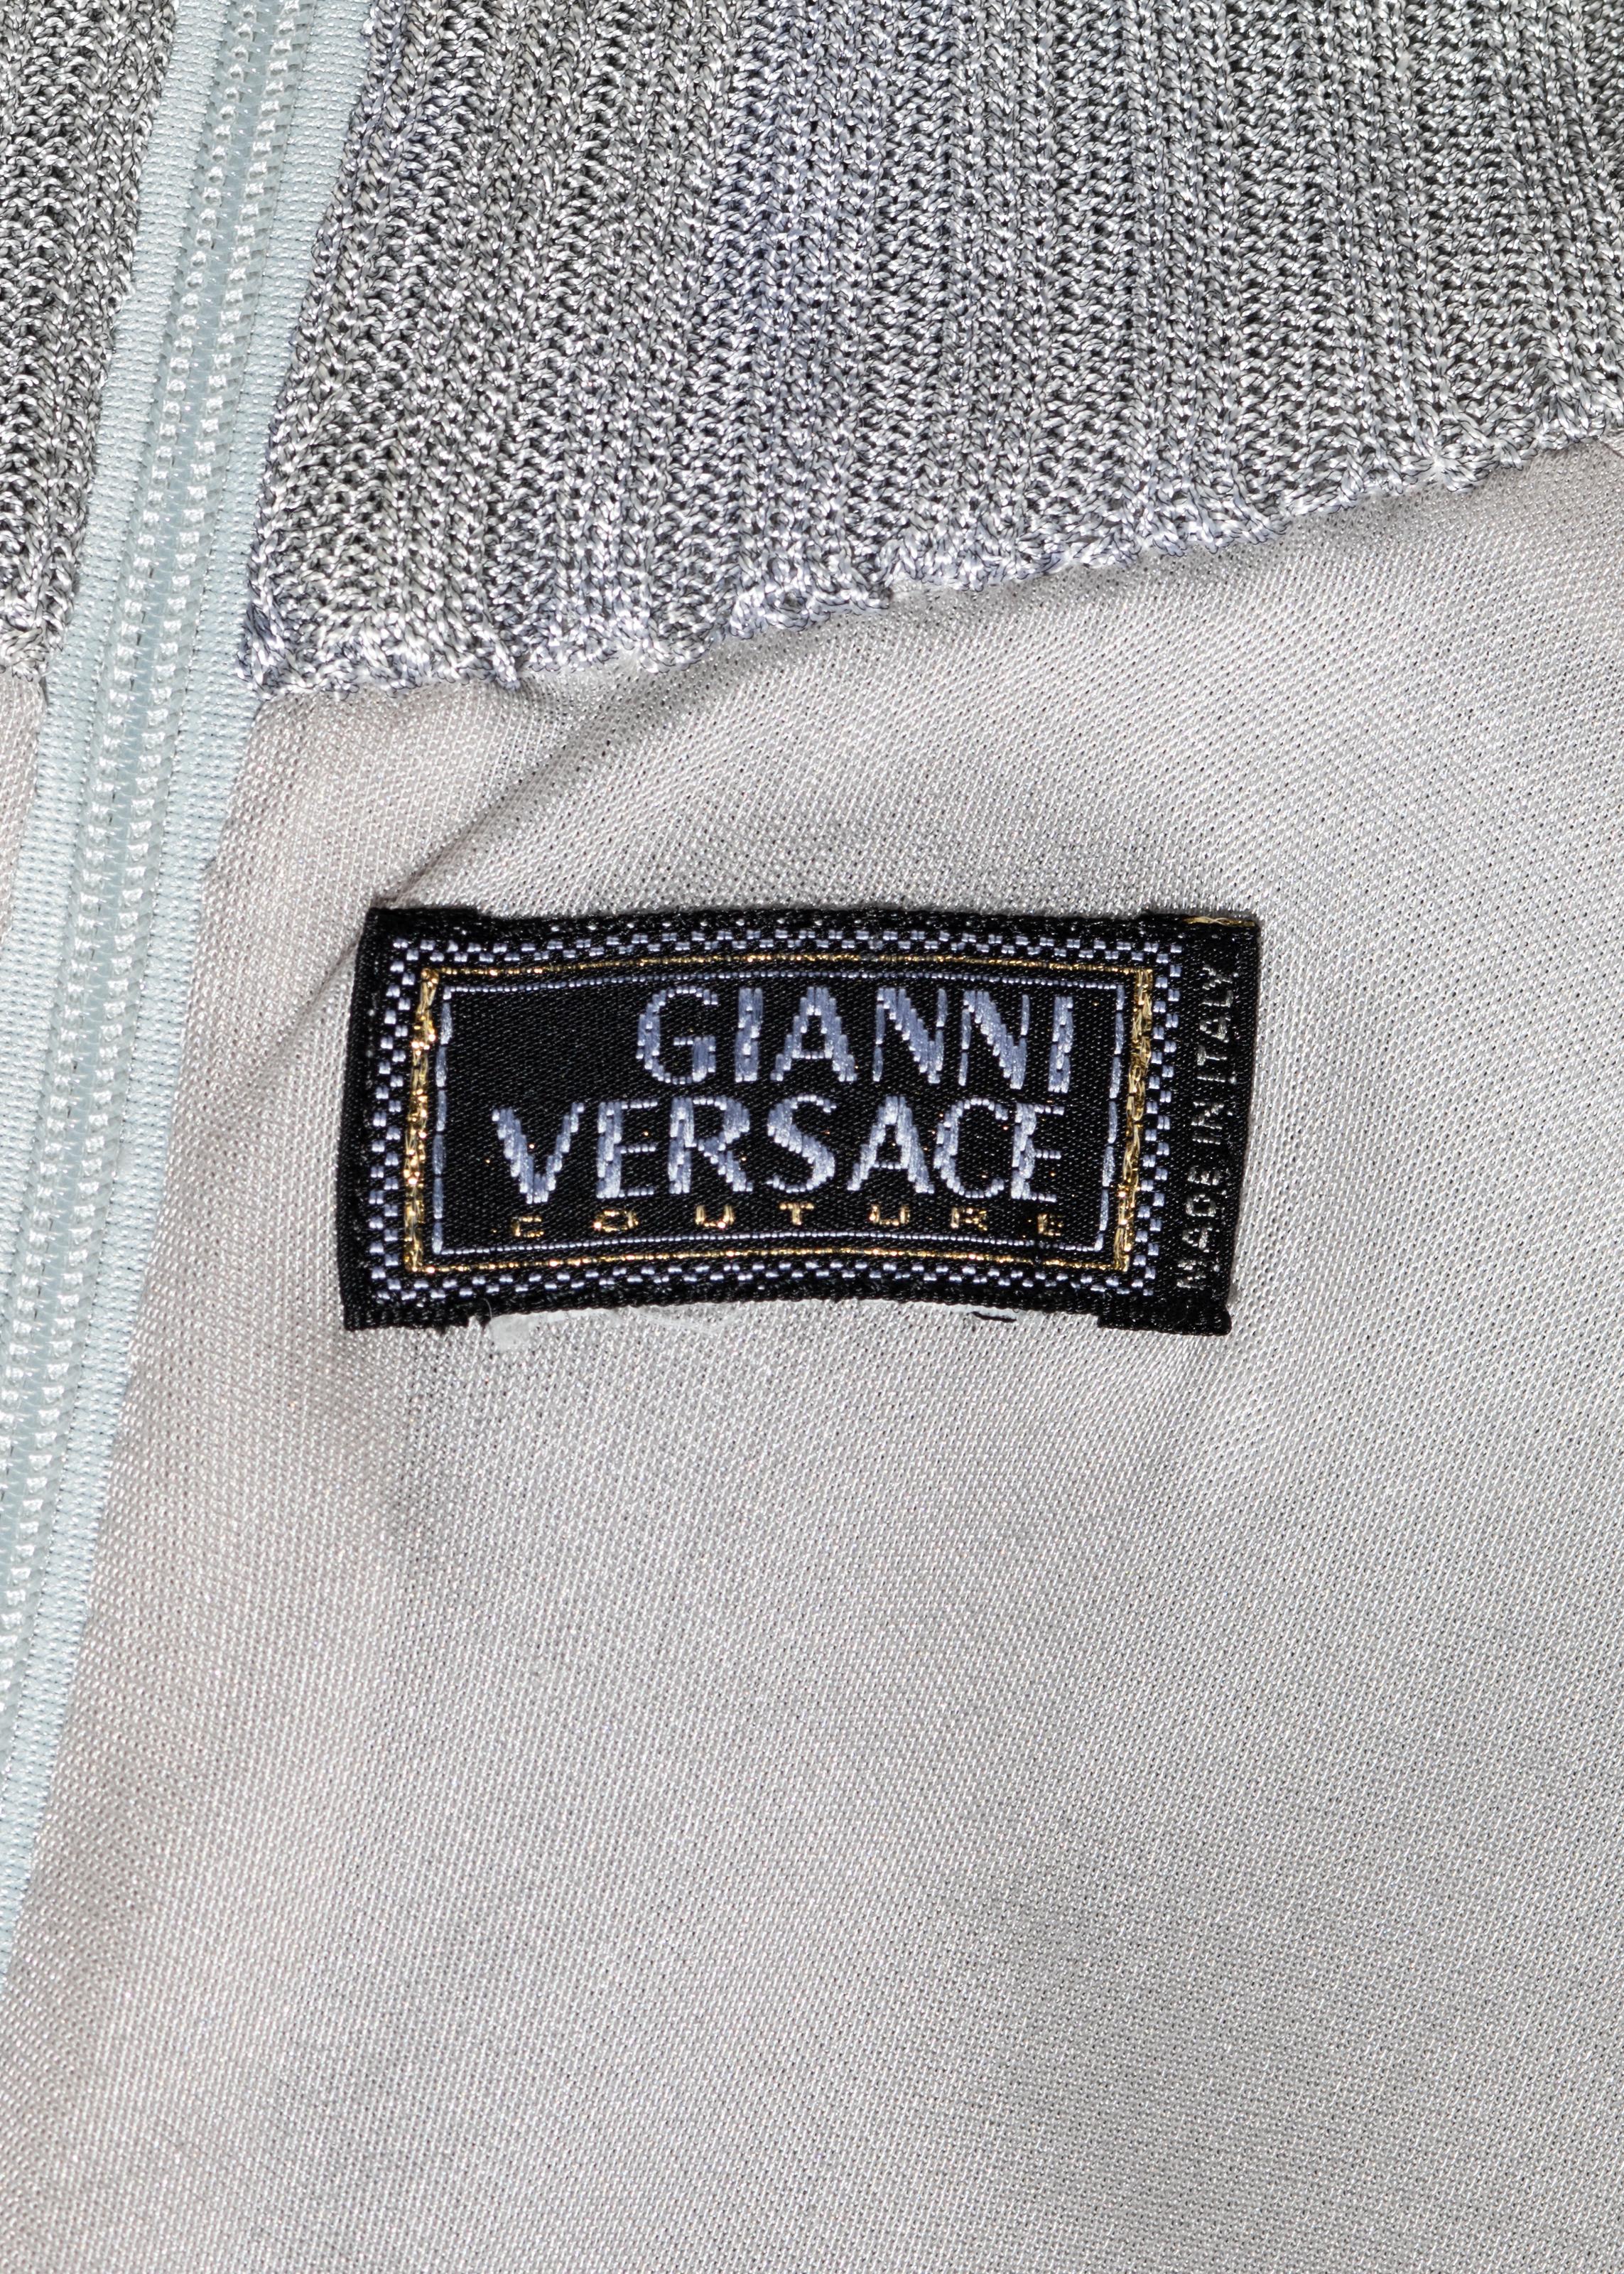 Women's Gianni Versace silver knitted rayon evening dress, fw 1996